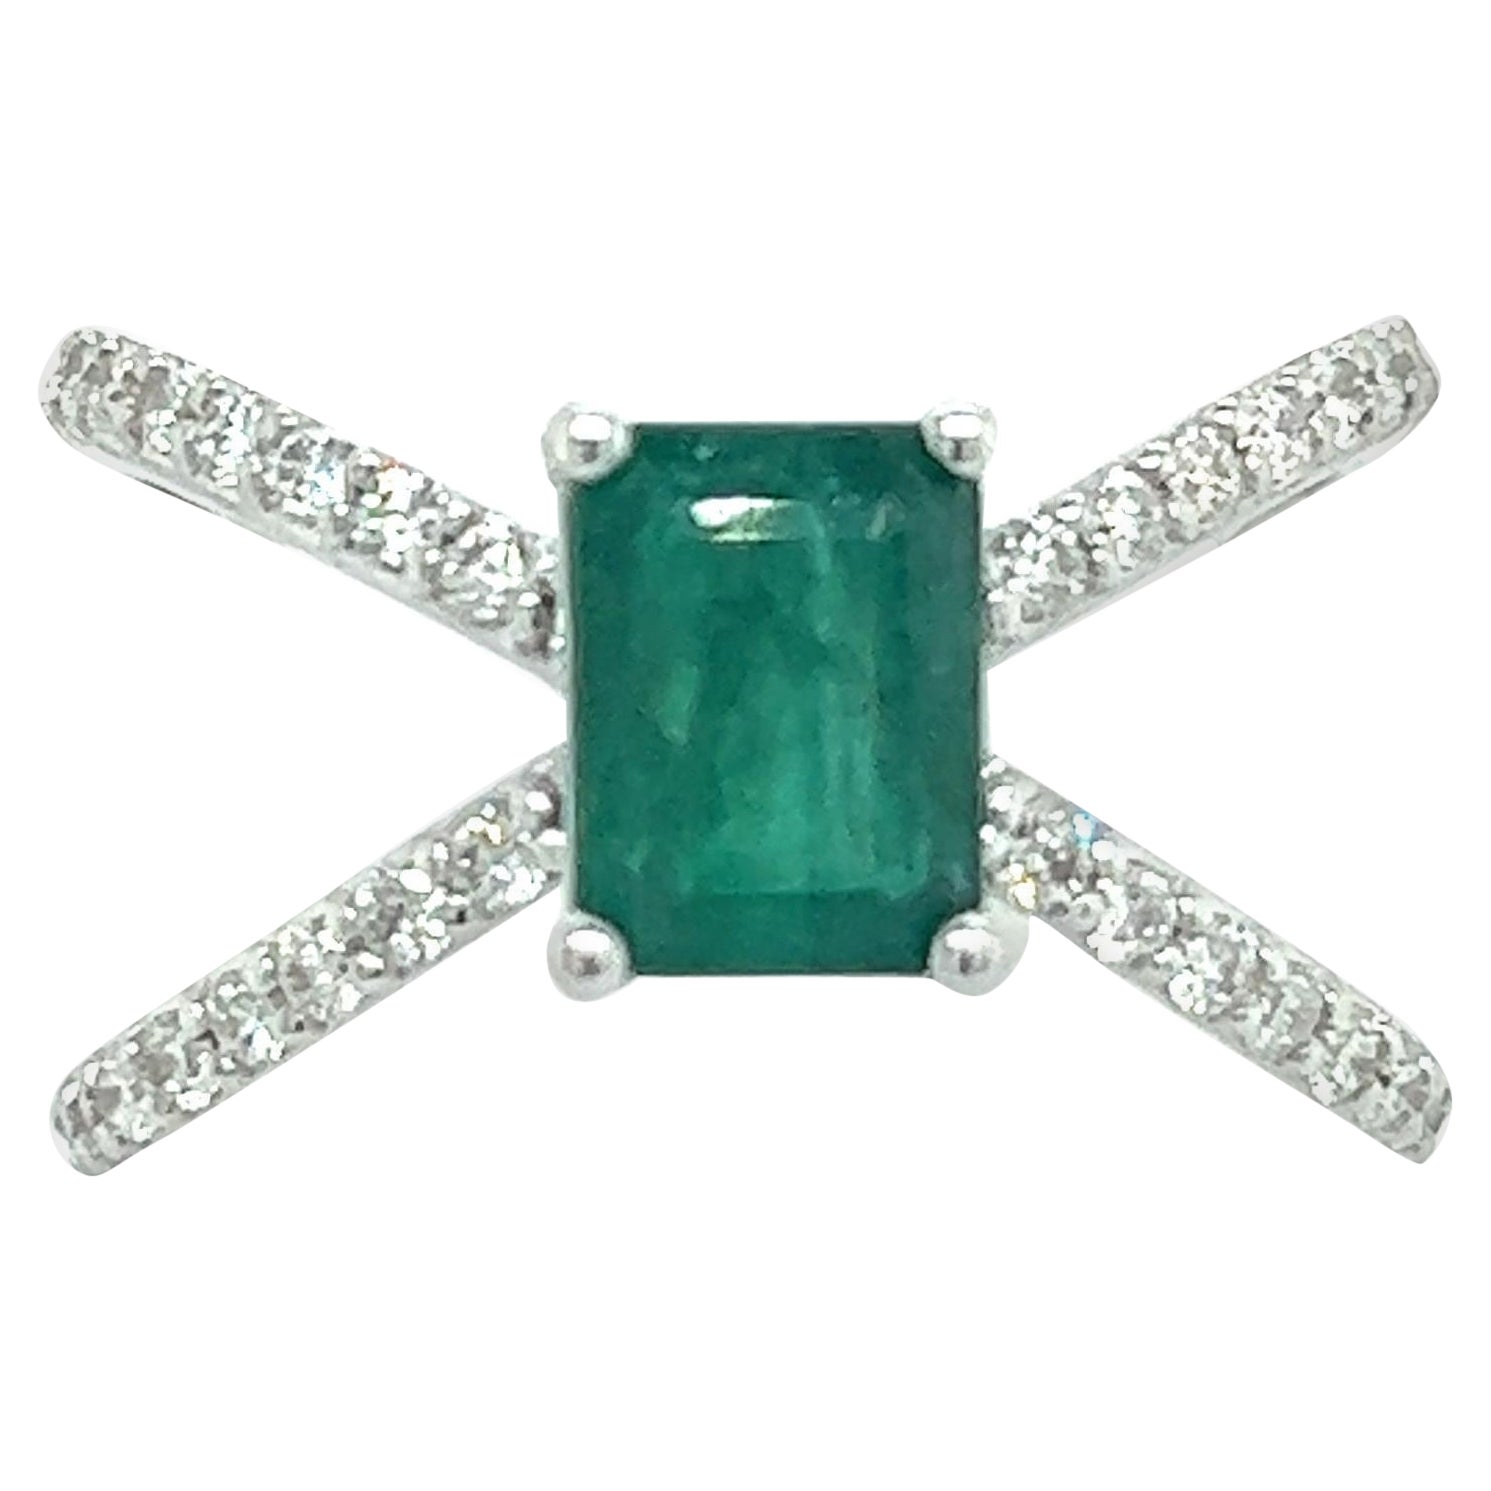 Natural Emerald Diamond Ring 14k W Gold 1.7 TCW Certified For Sale